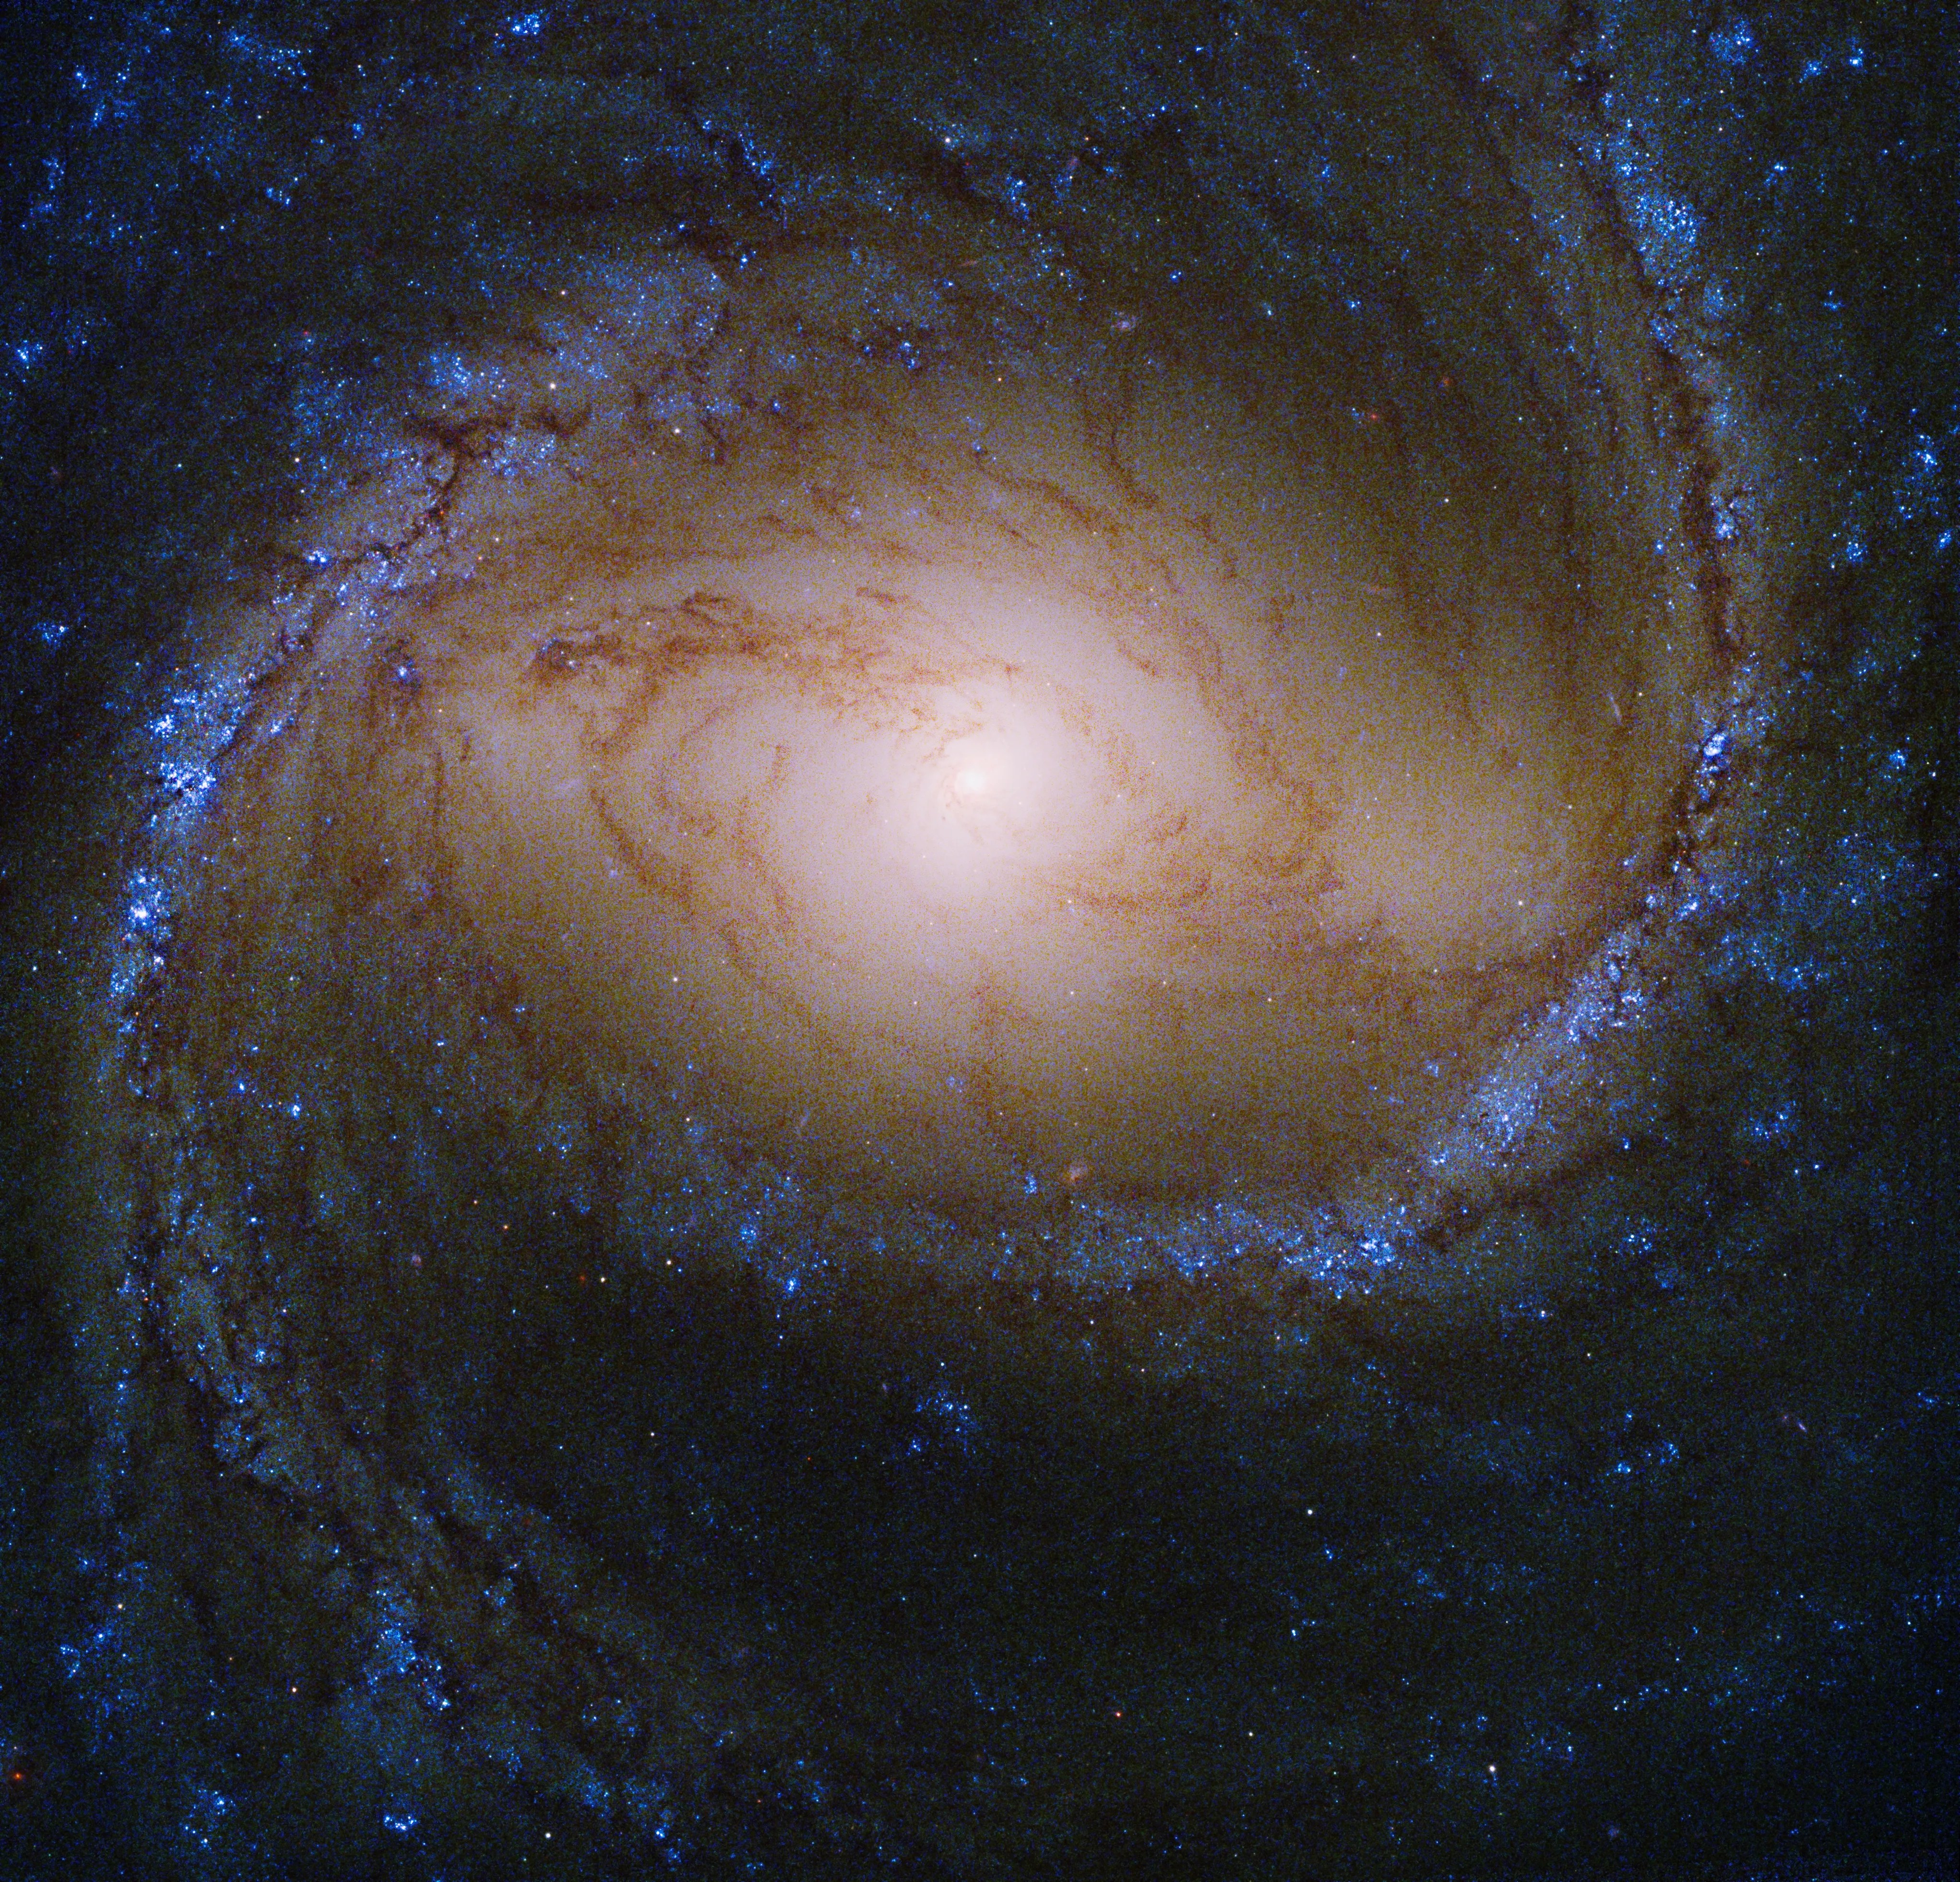 A bright yellow galaxy core shines, surrounded by spiral arms laced through with dark dust and bright blue regions of new stars.